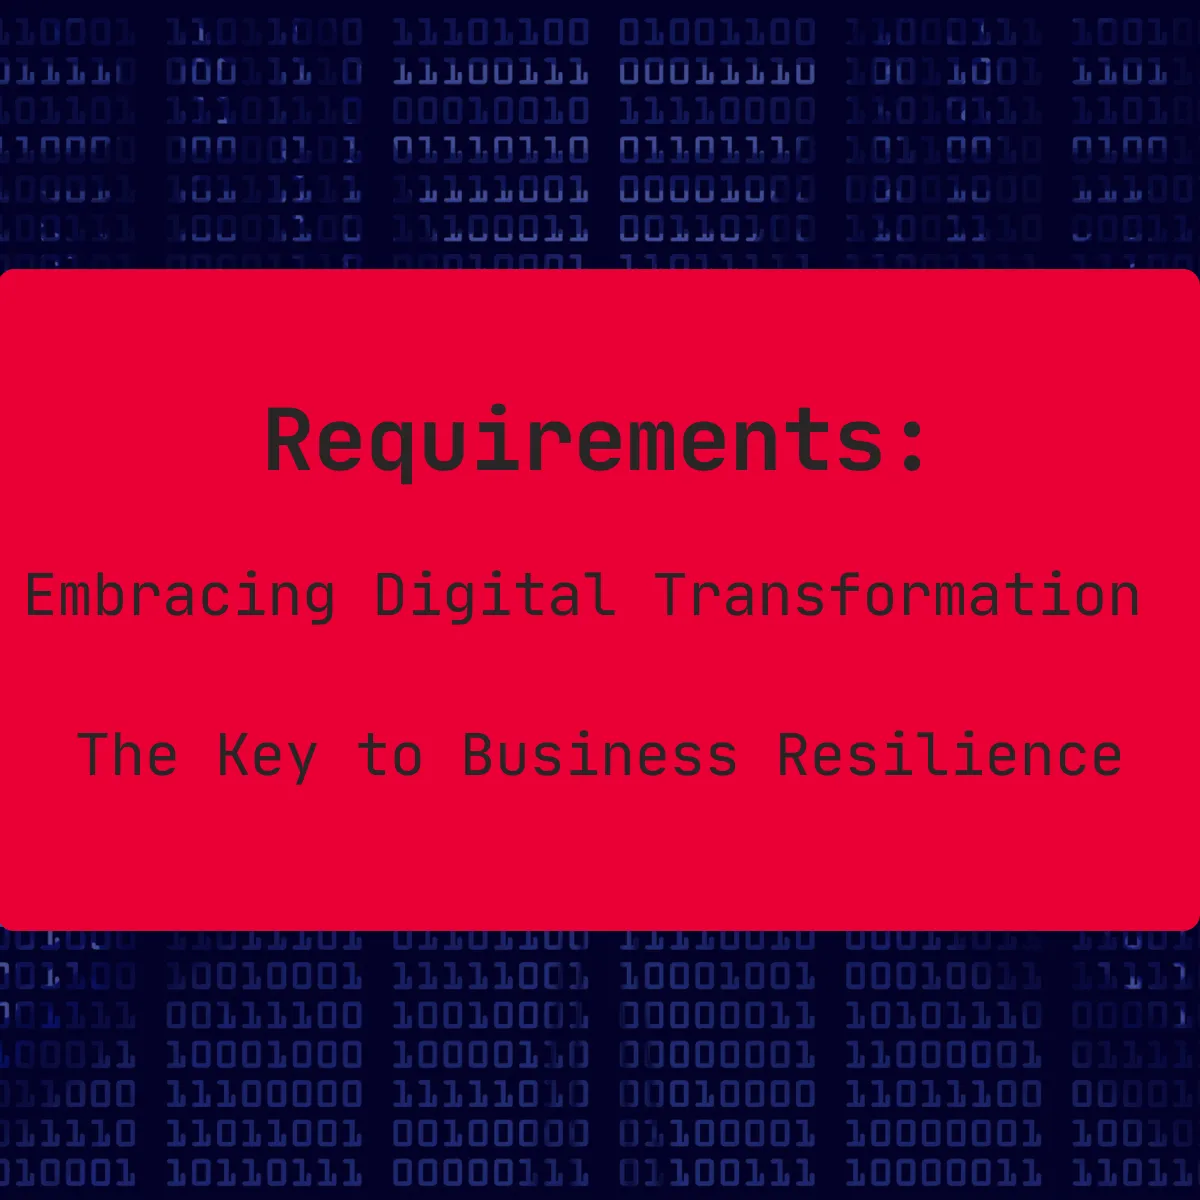 Embracing Digital Transformation: The Key to Business Resilience